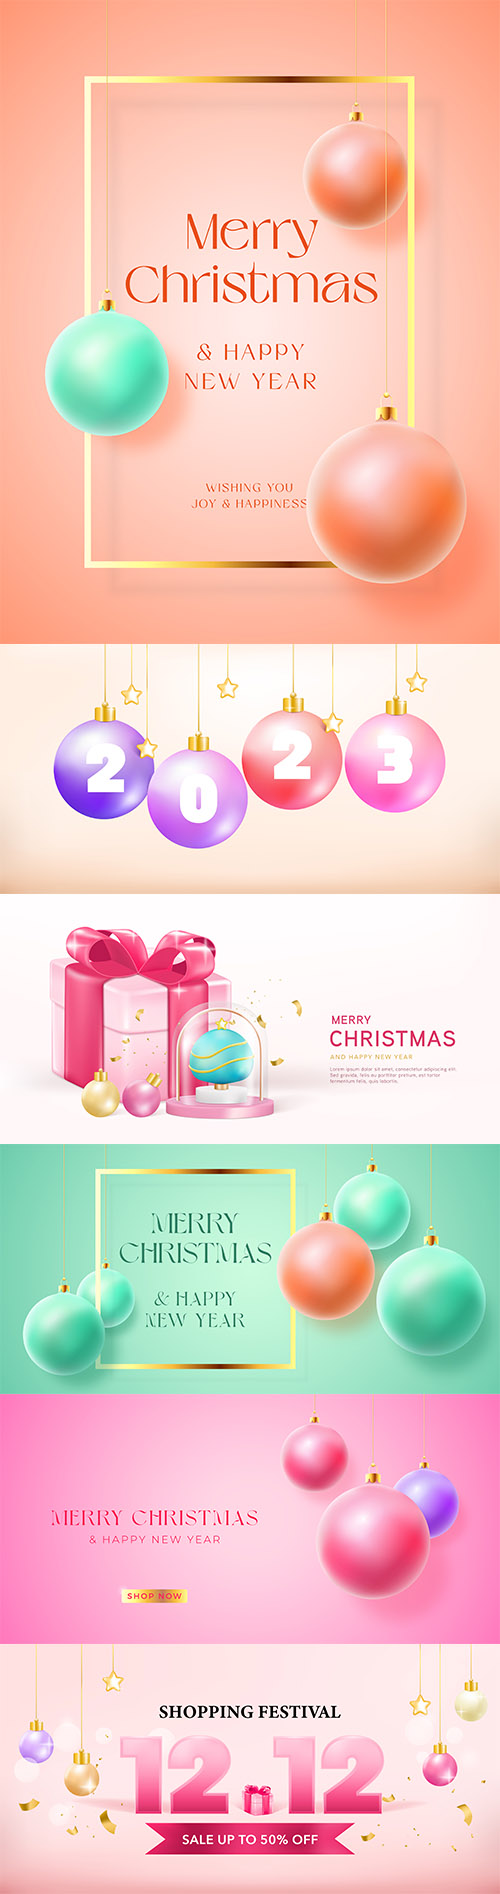 Happy new year and merry christmas banner, gift box christmas decorative design